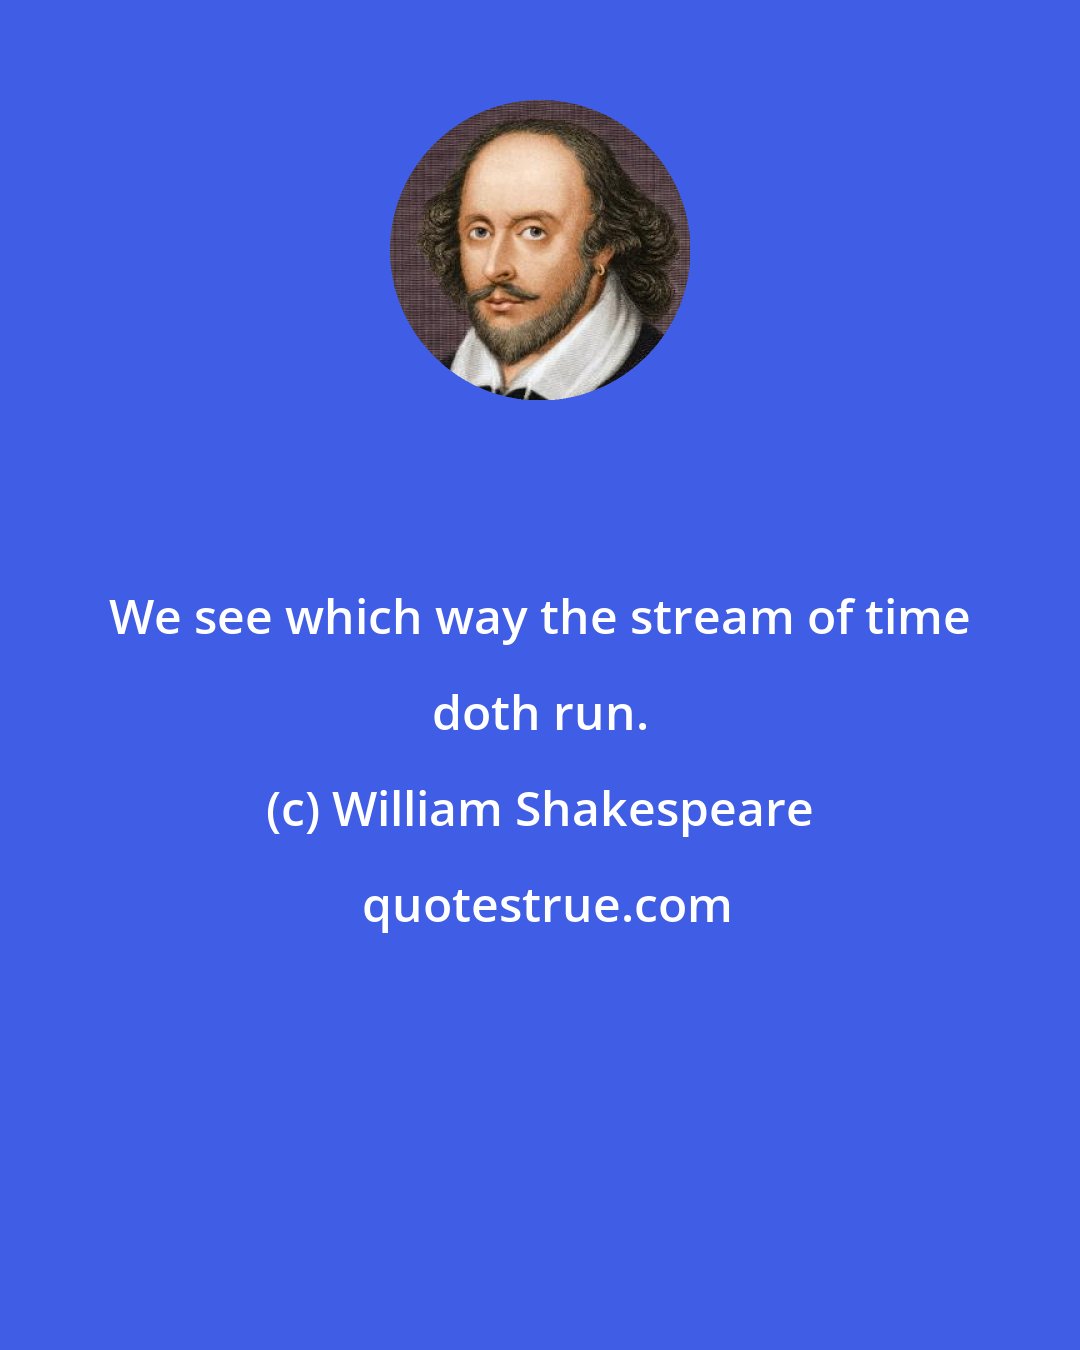 William Shakespeare: We see which way the stream of time doth run.